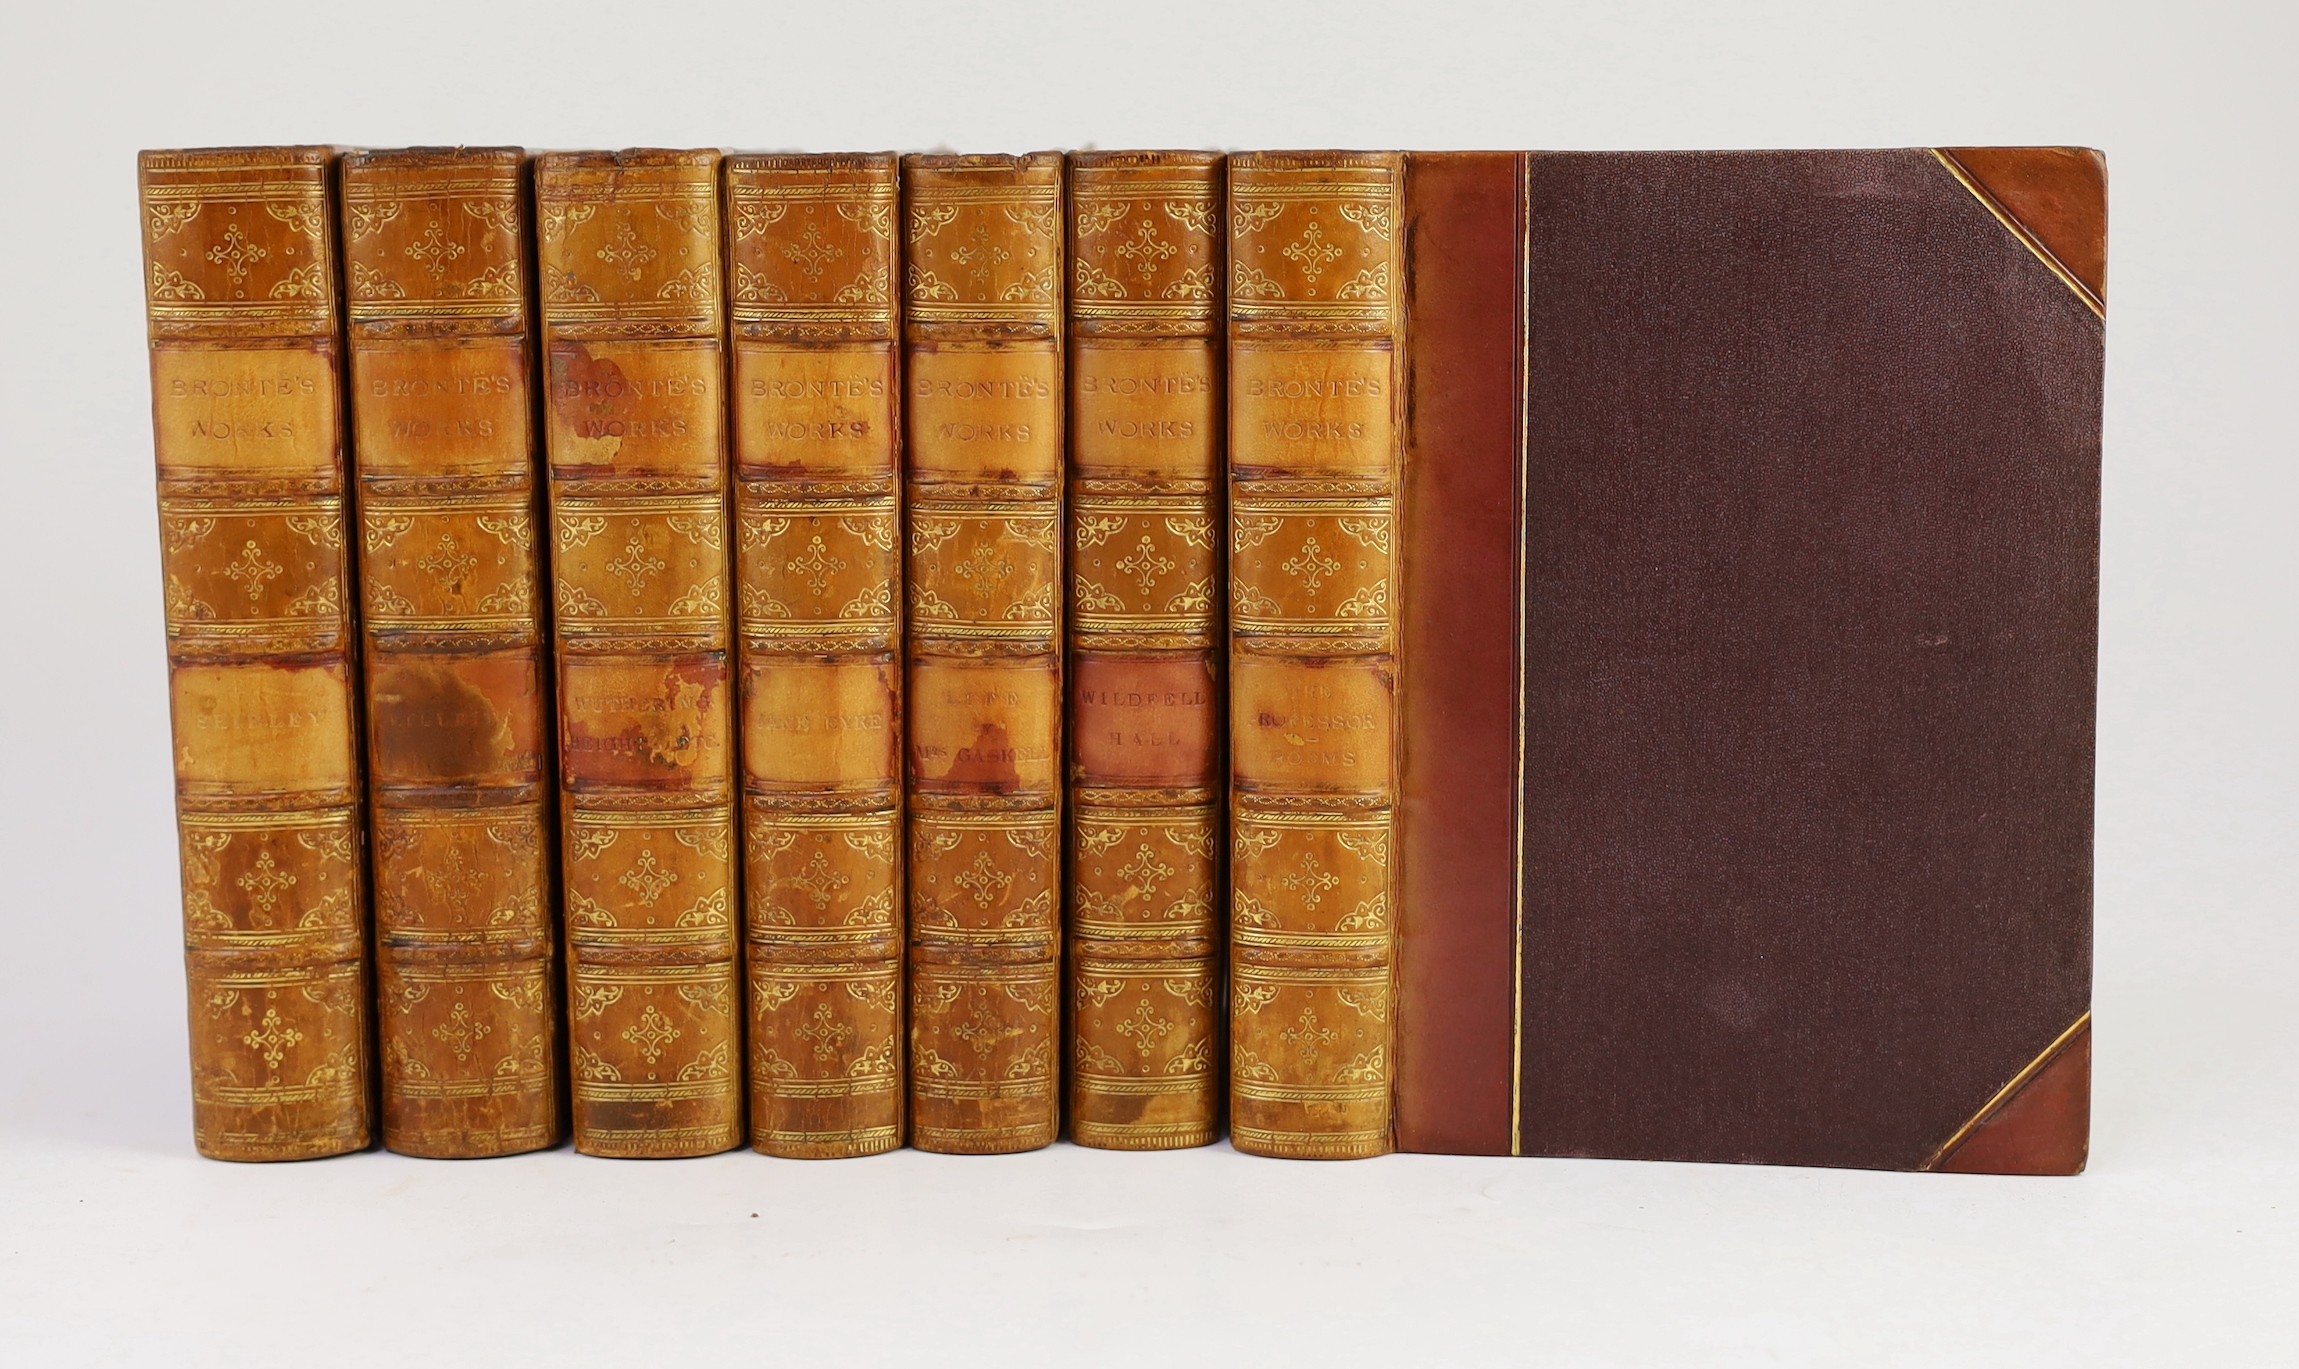 Bronte, Charlotte, Emily & Anne - Life and Works of Charlotte Bronte and Her Sisters, including The Life of Charlotte Brontë by Elizabeth Gaskell, 7 vols, illustrated by E.J. Wimperis, 8vo, half calf, spine lacking label